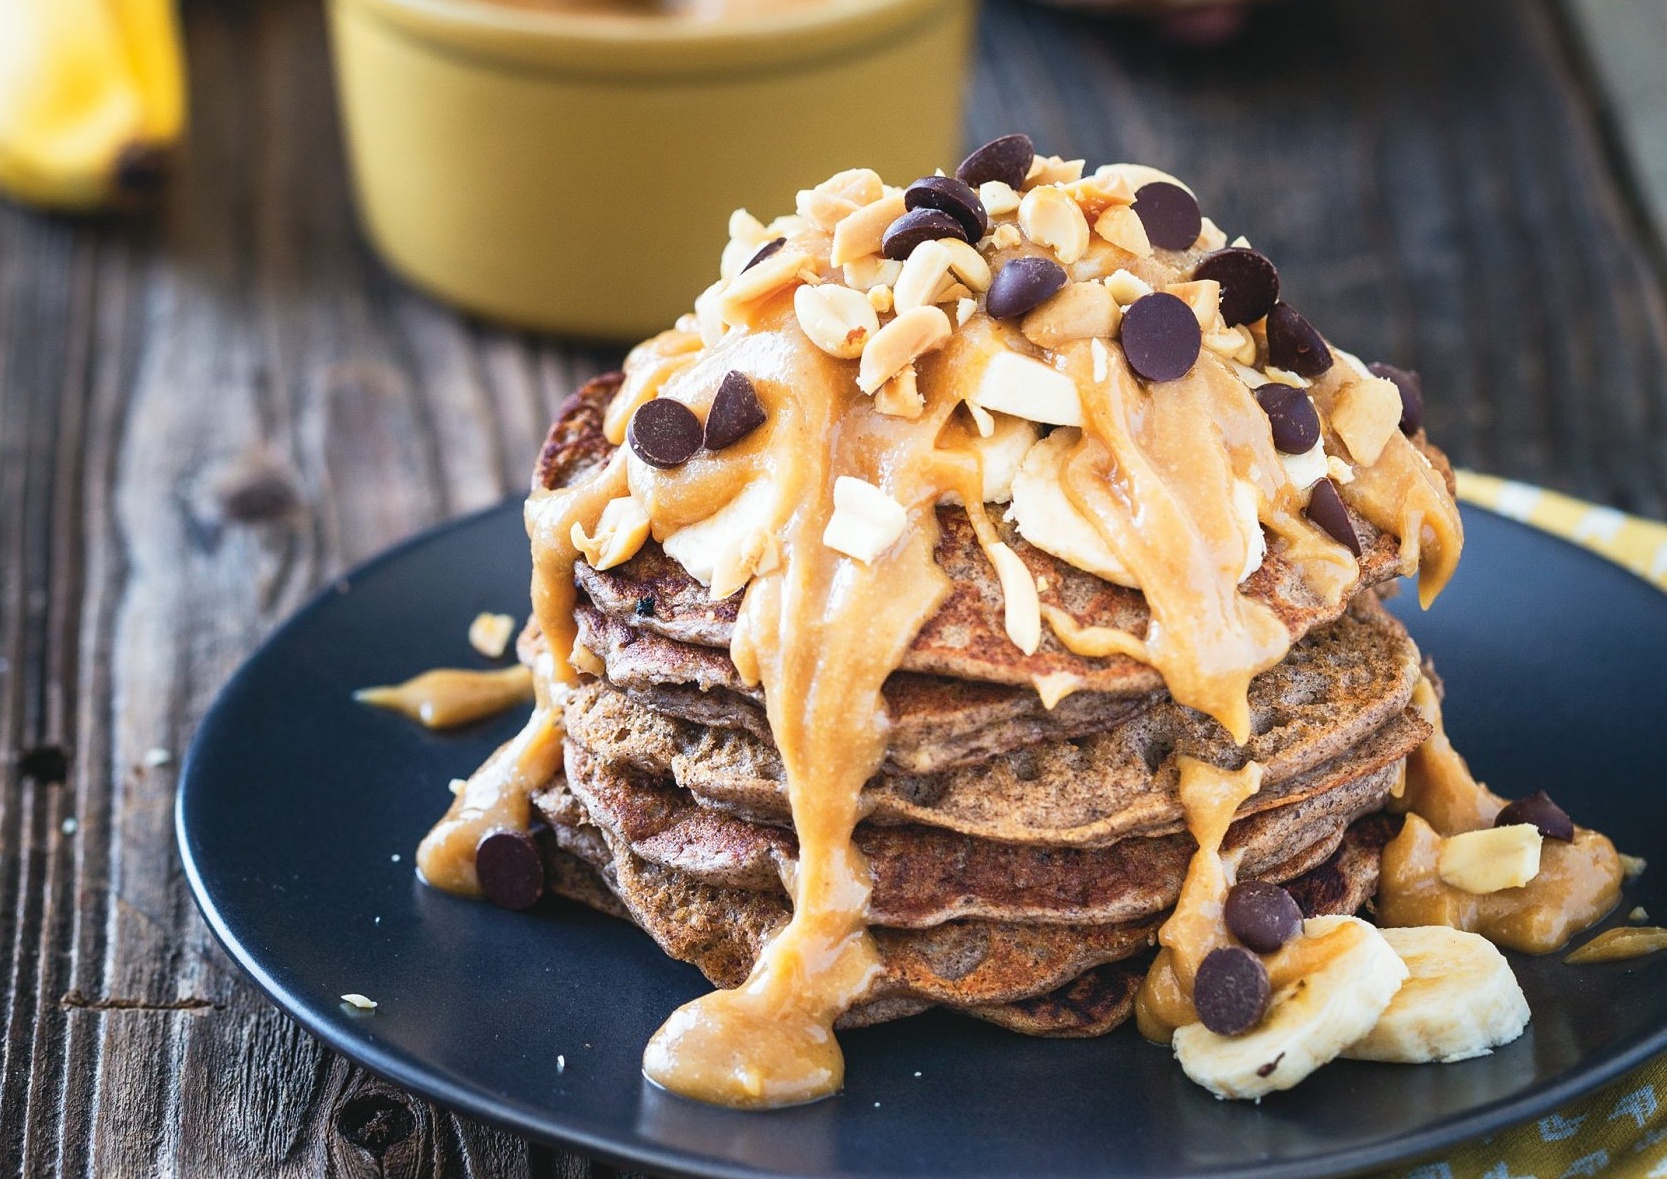 From Black Bean and Corn Salad to Buckwheat Banana Bread Pancakes with Peanut Butter Syrup: Our Top Eight Vegan Recipes of the Day!